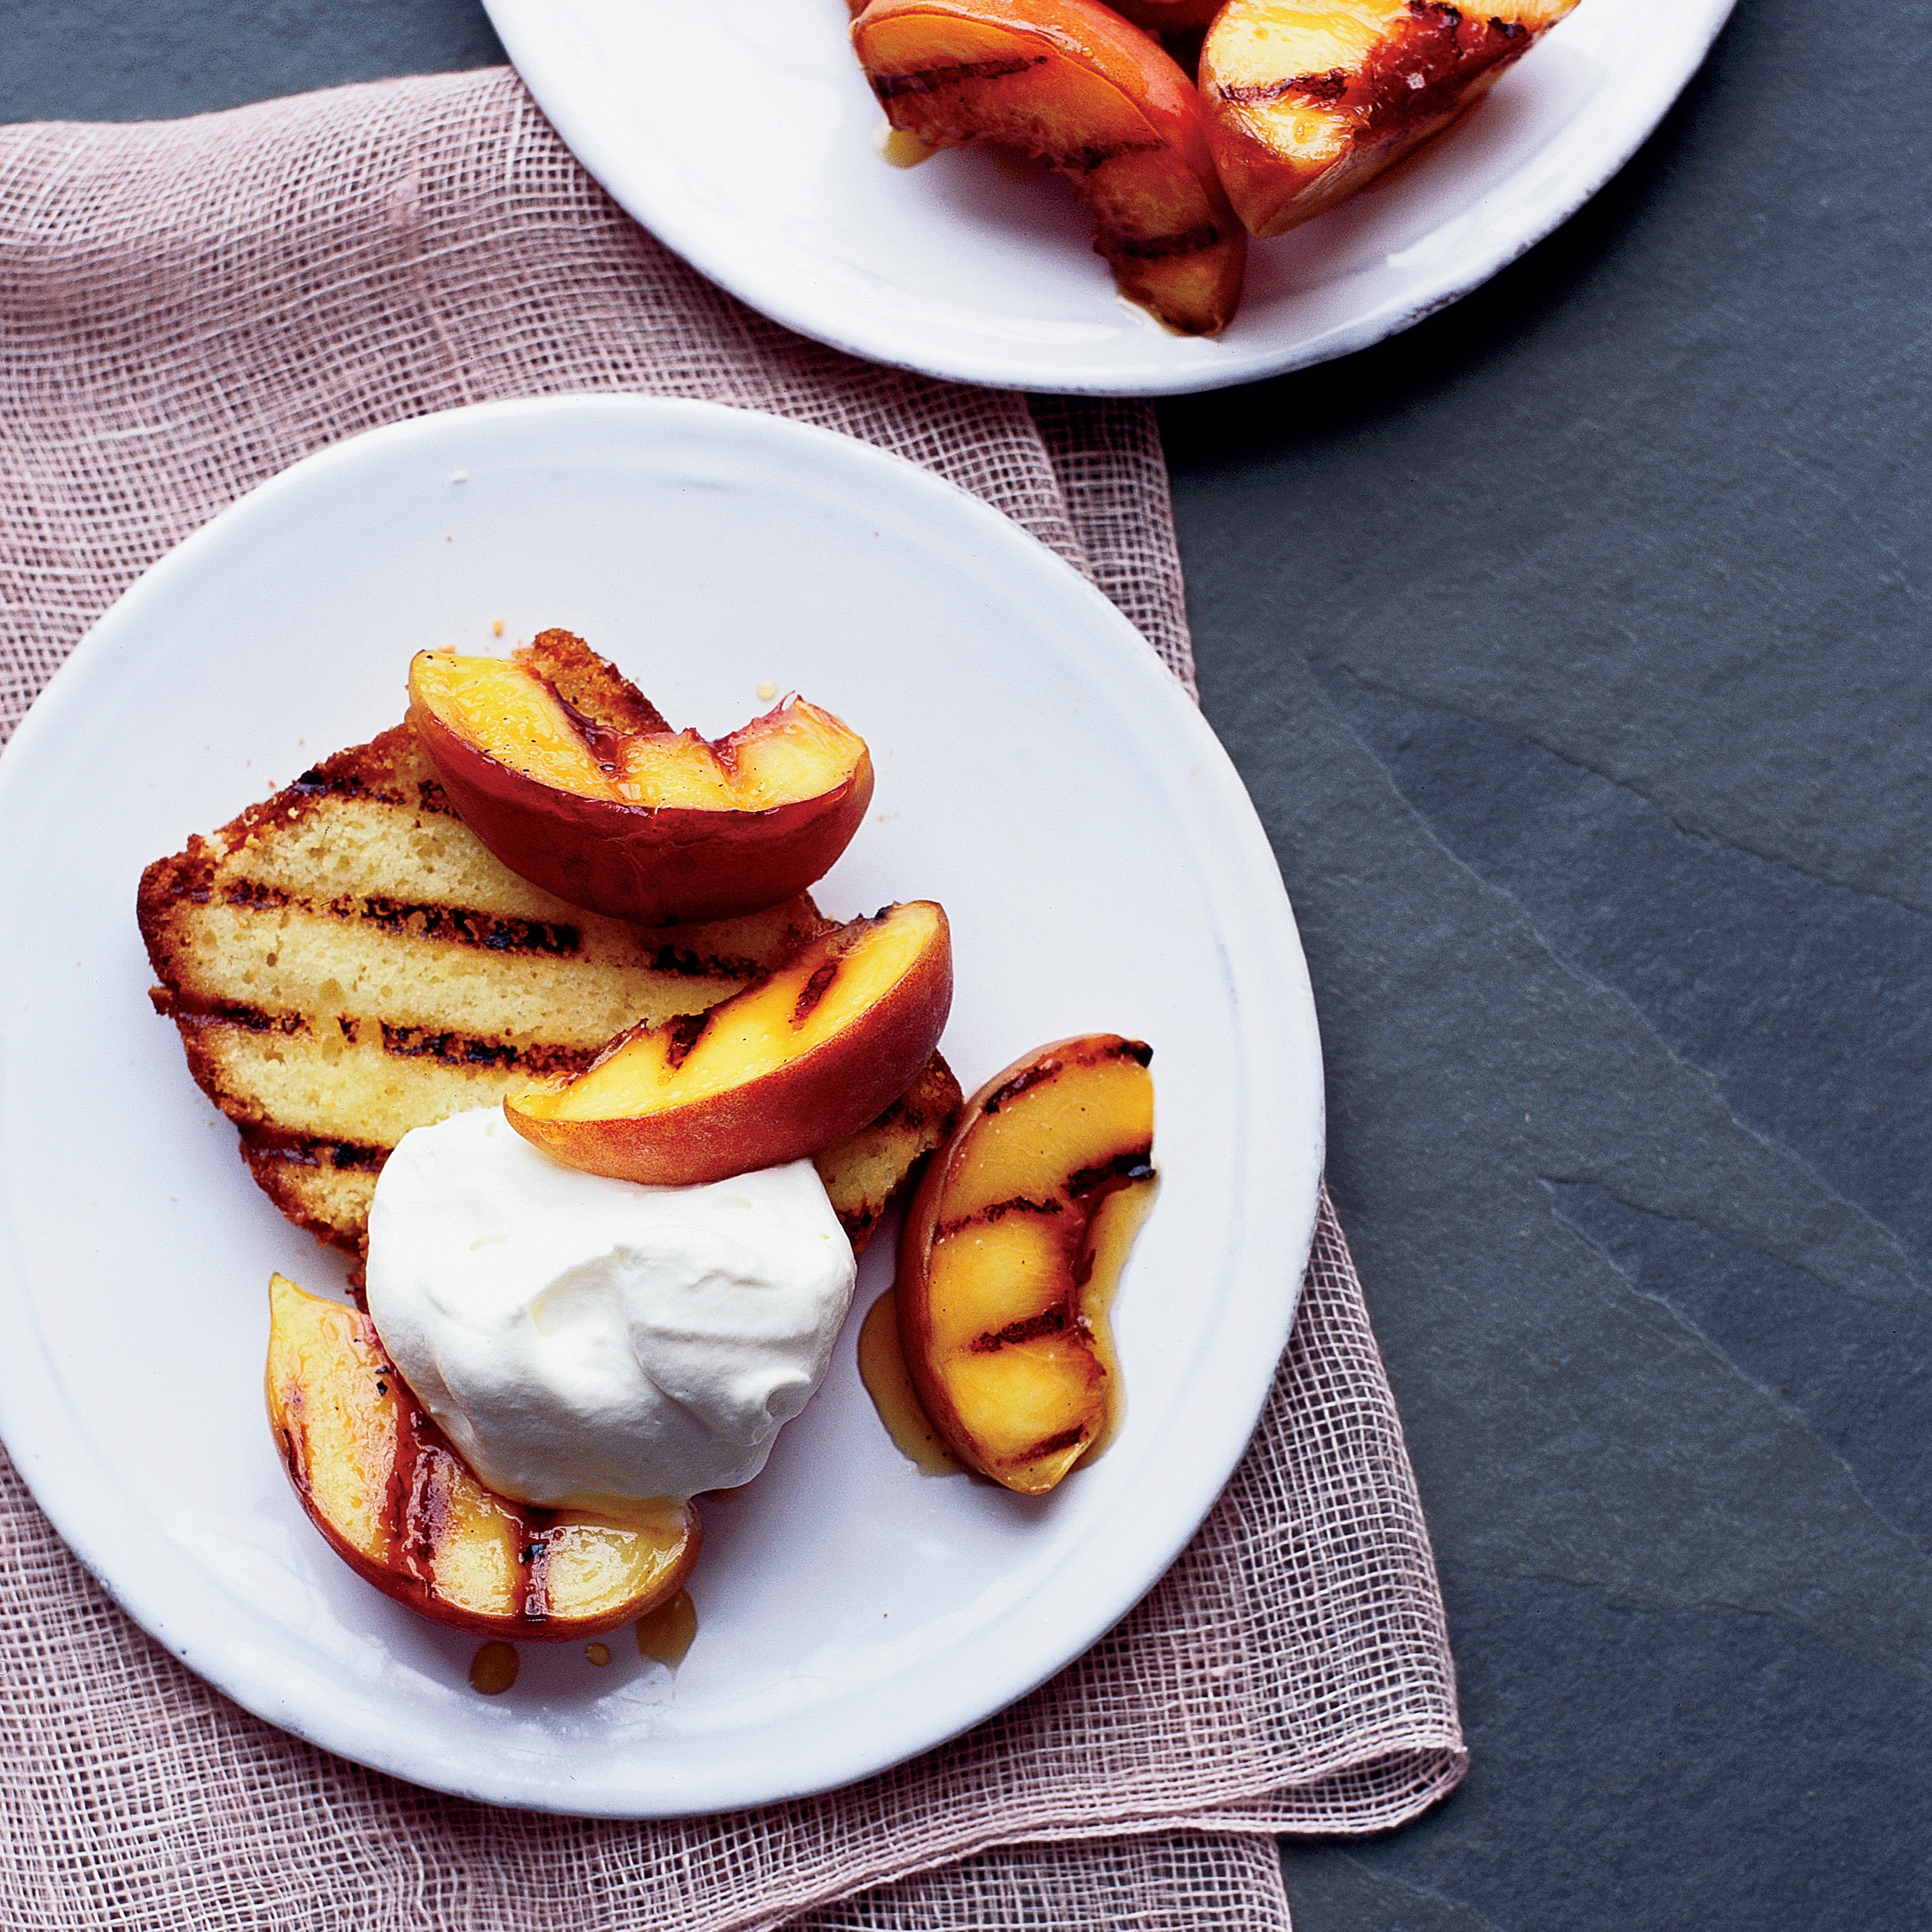 Grilled Pound Cake
 Grilled Lemon Pound Cake with Peaches and Cream Recipe